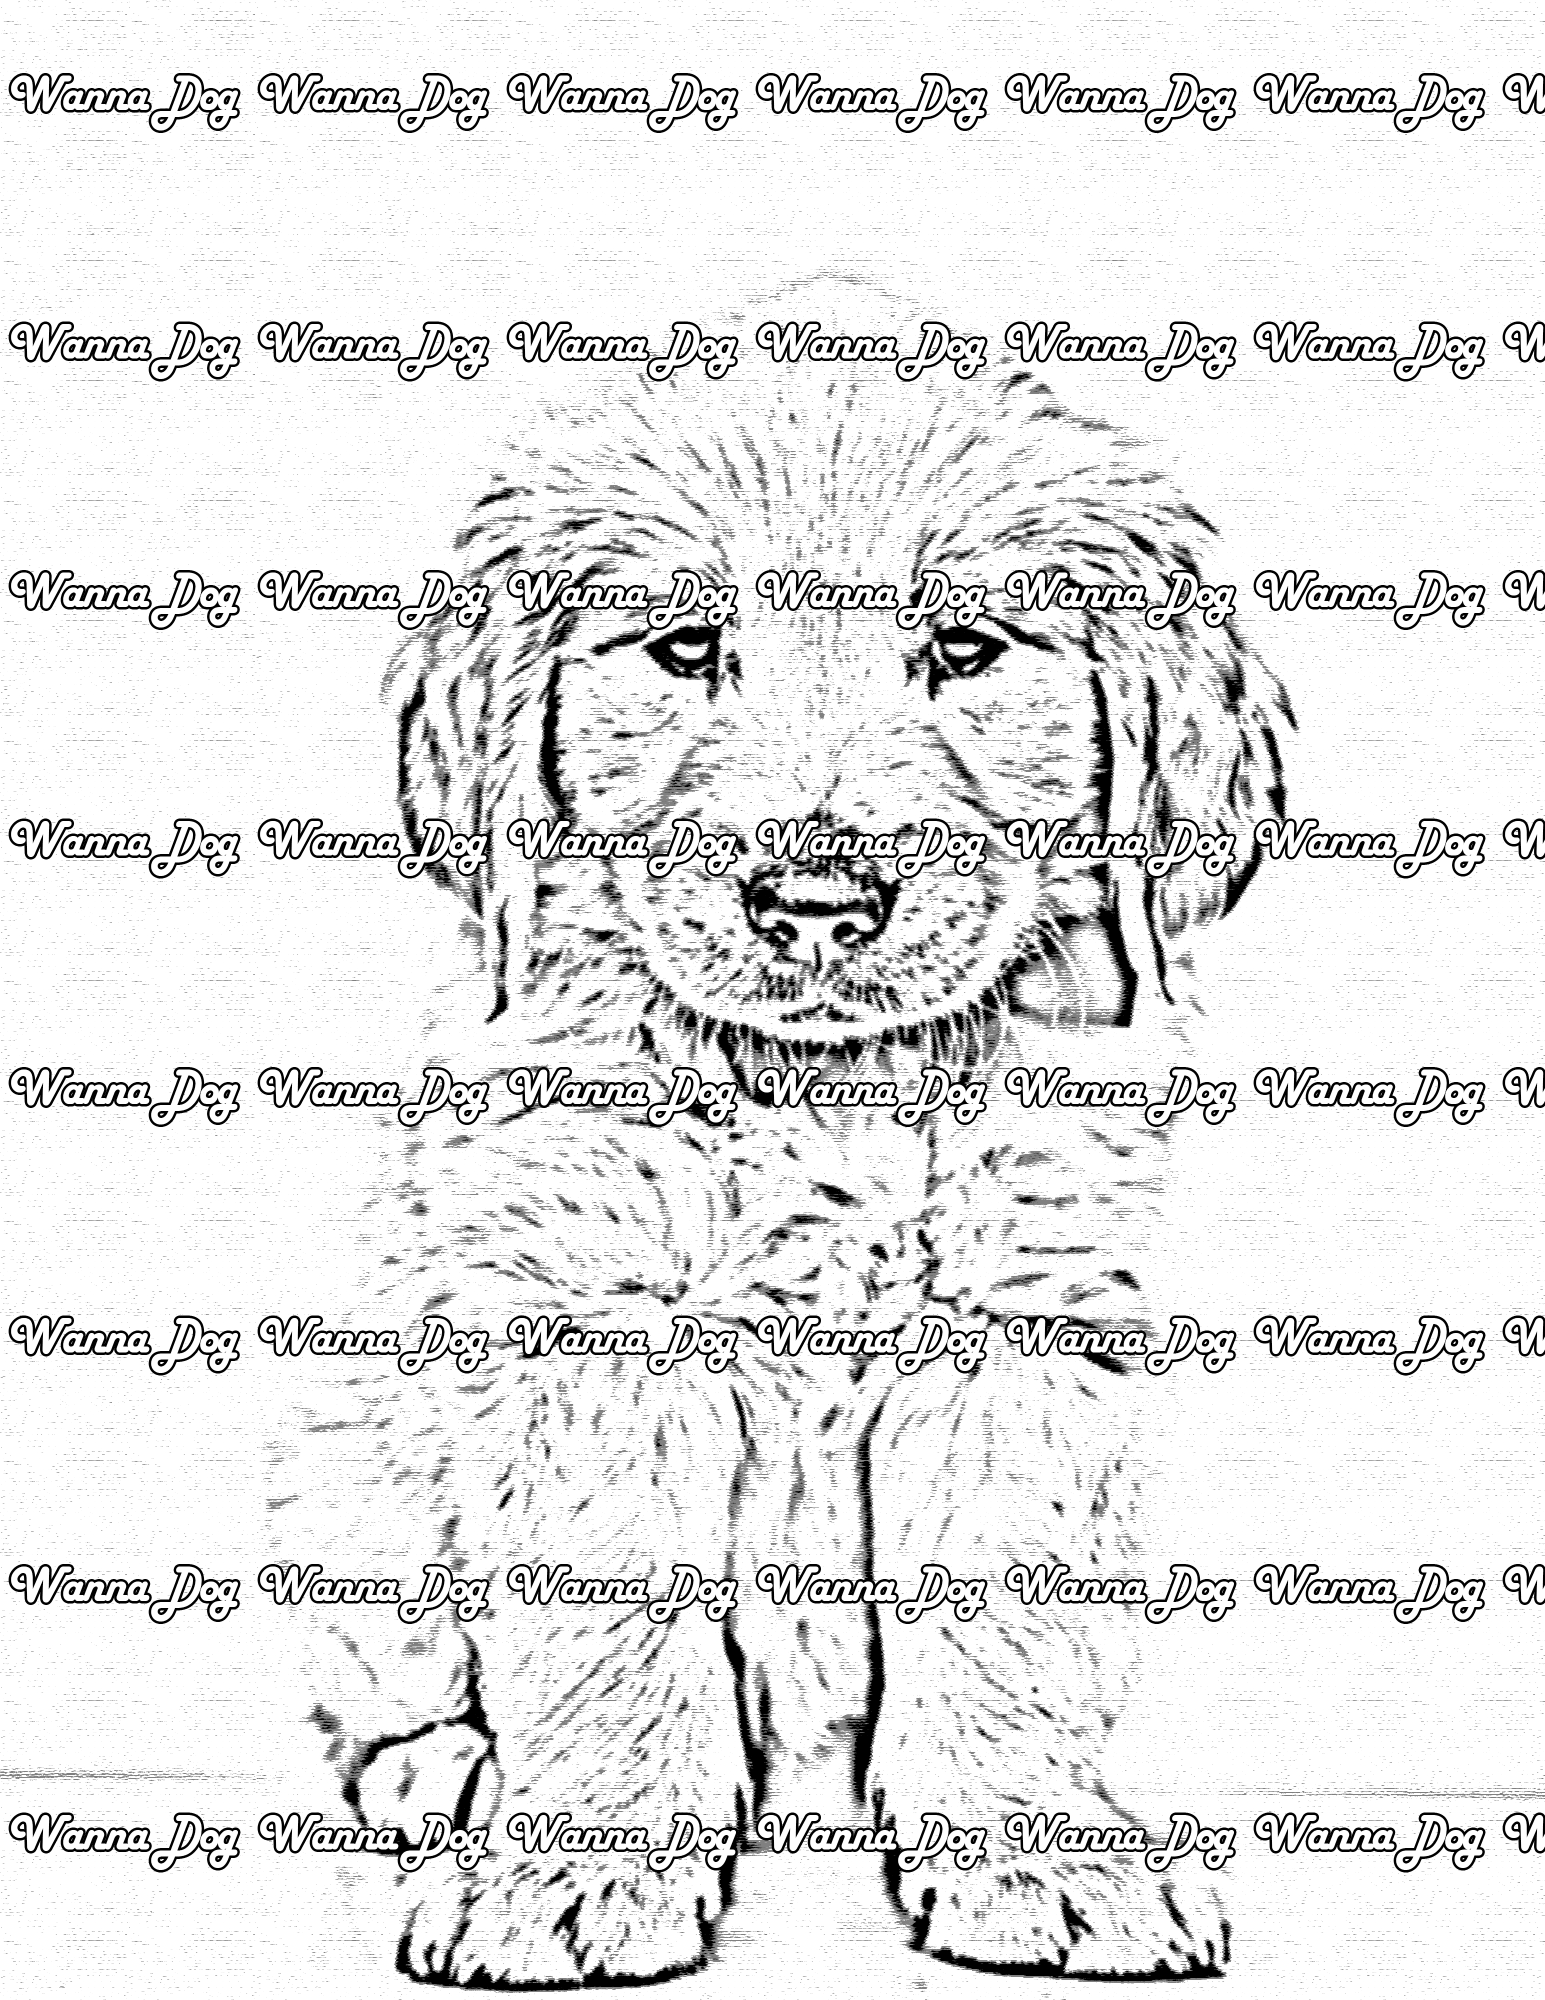 Golden Retriever Puppy Coloring Page of a Golden Retriever Puppy wearing a bowtie